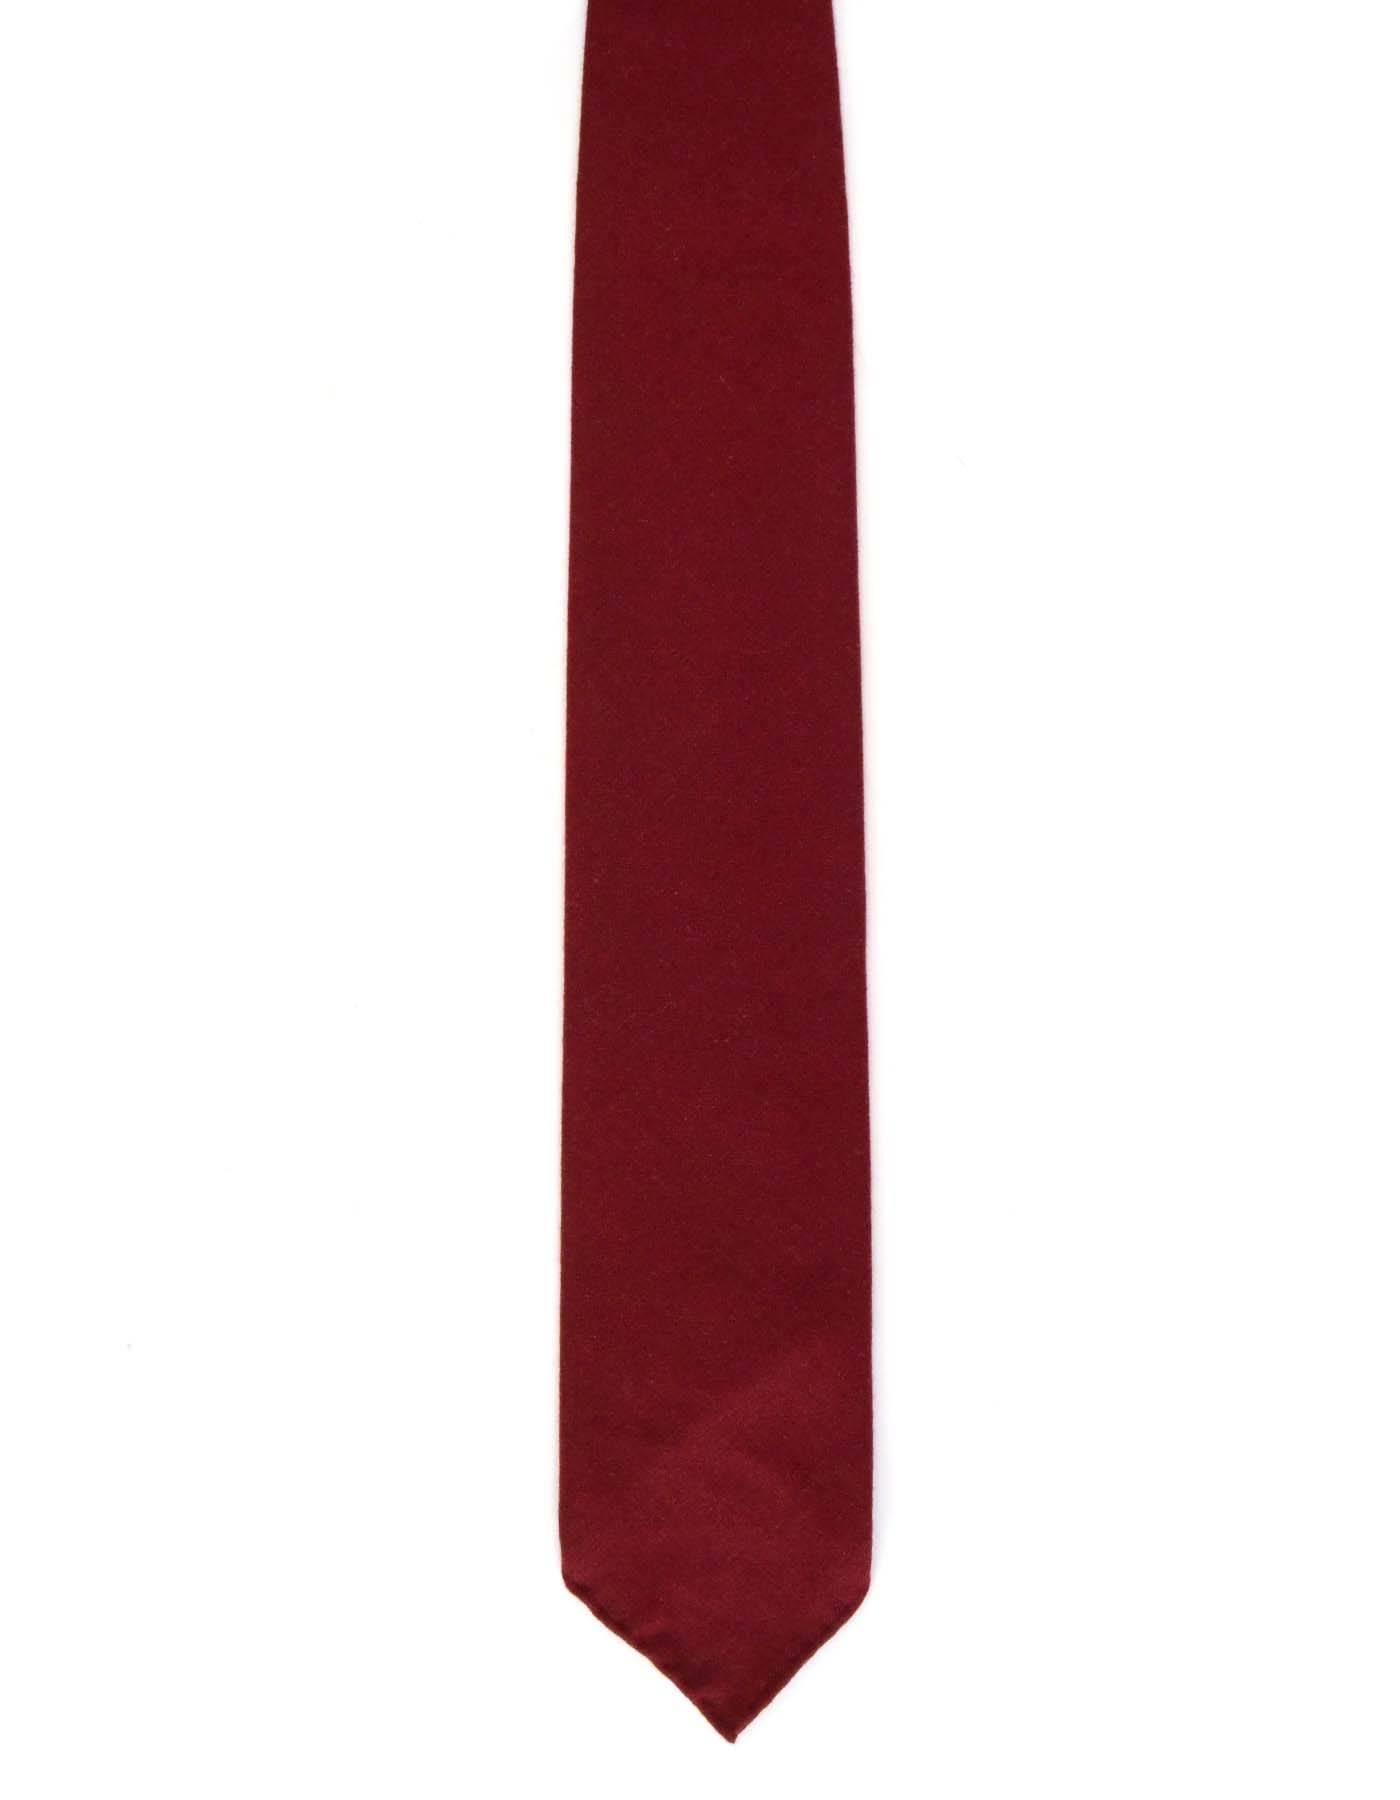 Hermes Burgundy Cashmere Tie
Made In: France
Color: Burgundy
Composition: 100% cashmere
Overall Condition: Excellent pre-owned condition
Measurements: 
Length: 60